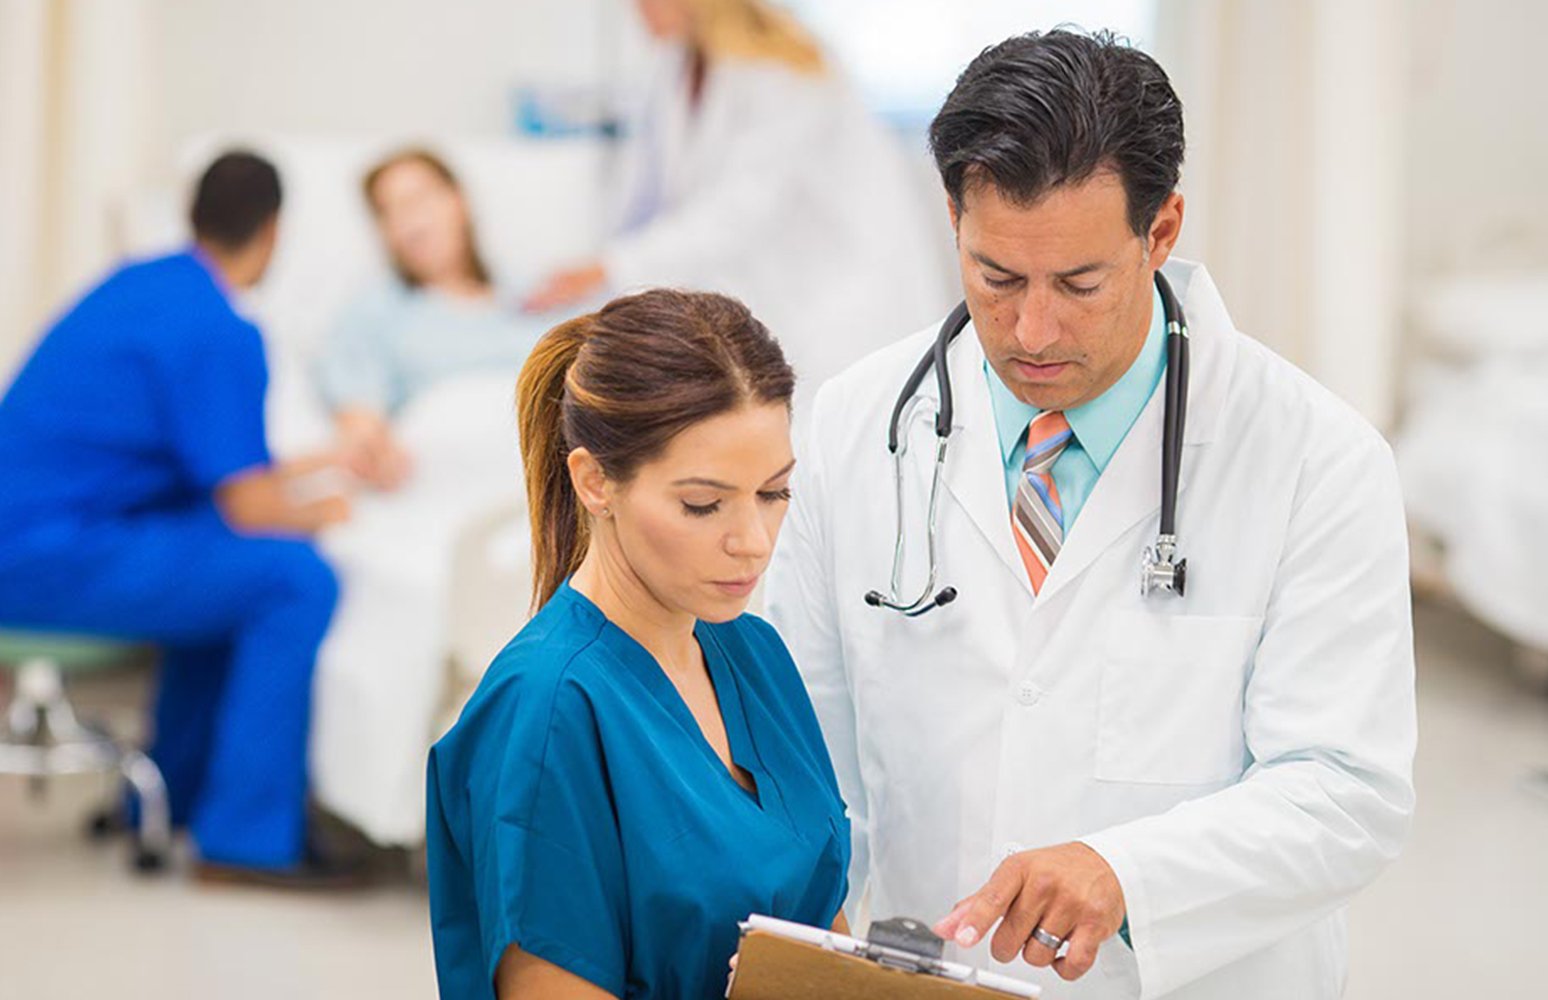 Female in blue scrubs looks at clipboard with male doctor standing next to her